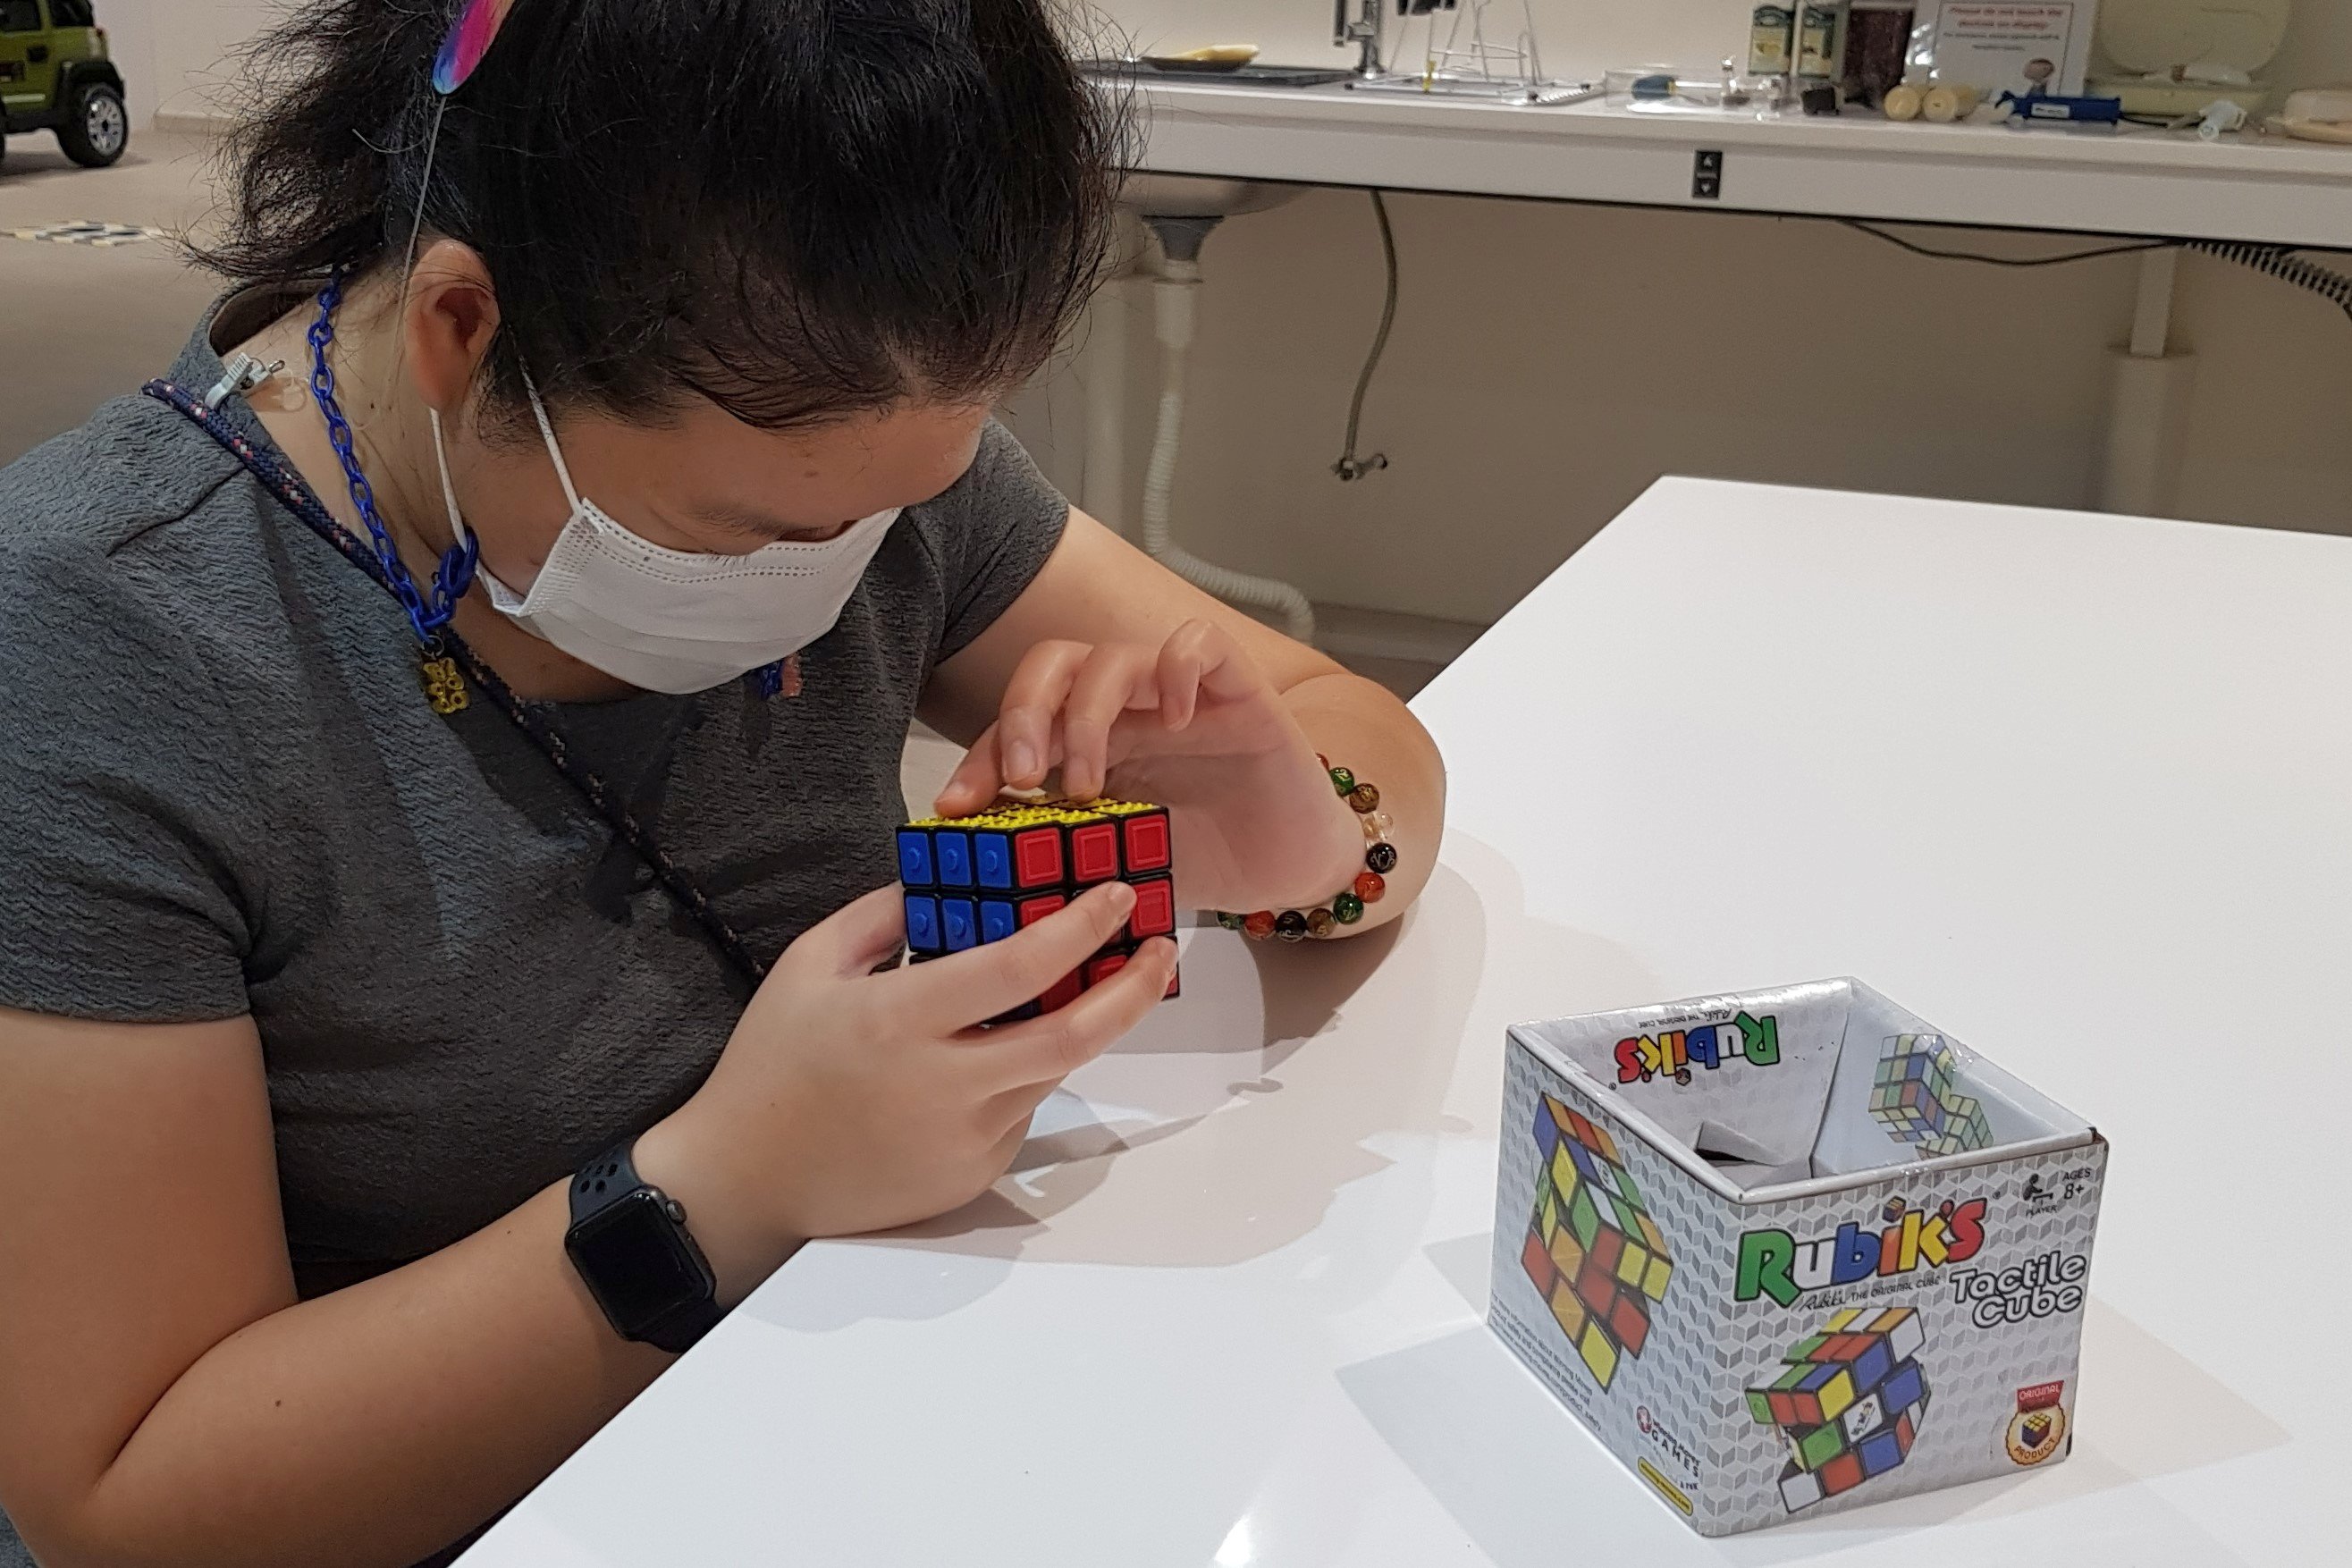 -Siew Ling fingering the Rubik’s Tactile Cube which is marked with different symbols to represent the six colours of the cube.